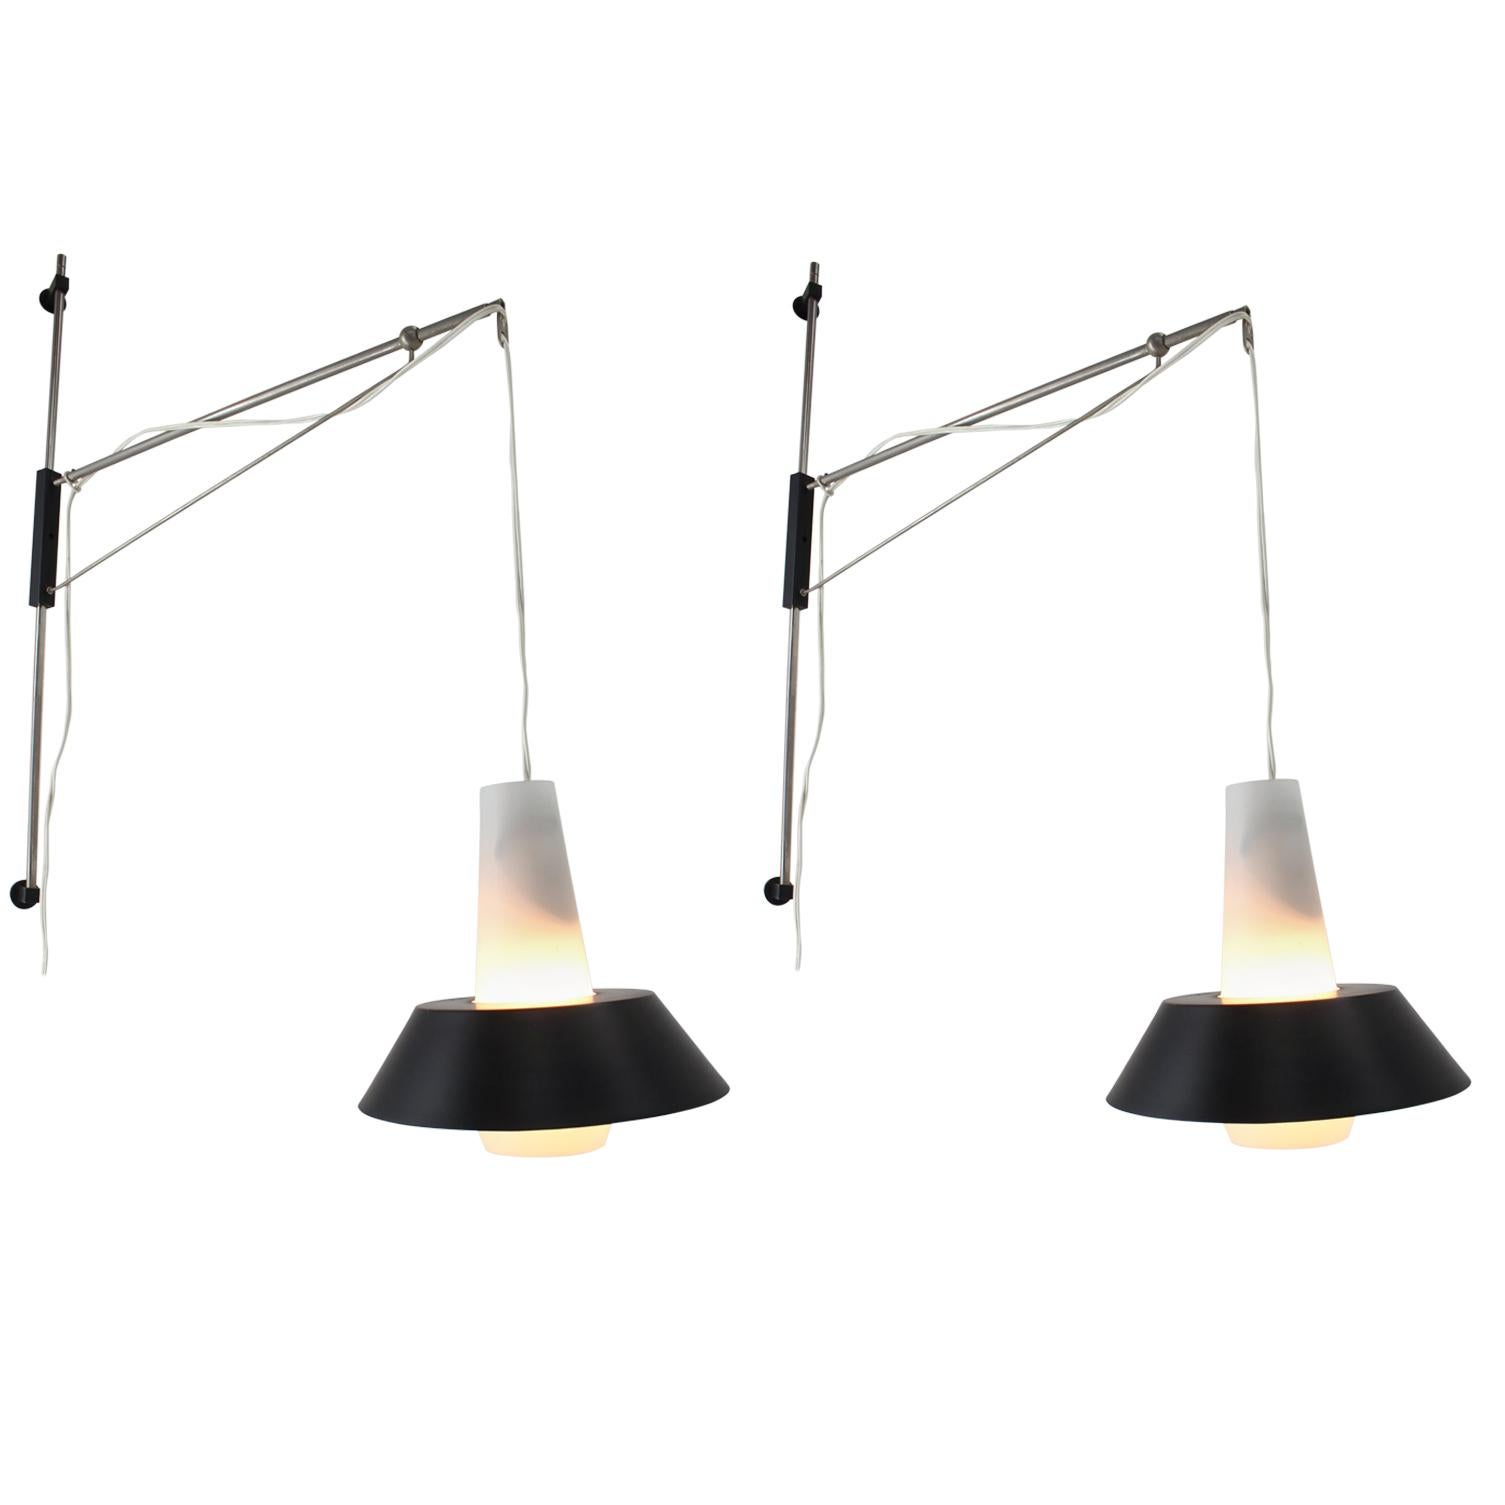 Pair of Mid century Wall Lamps Designed by Josef Hejtman, 1970s For Sale